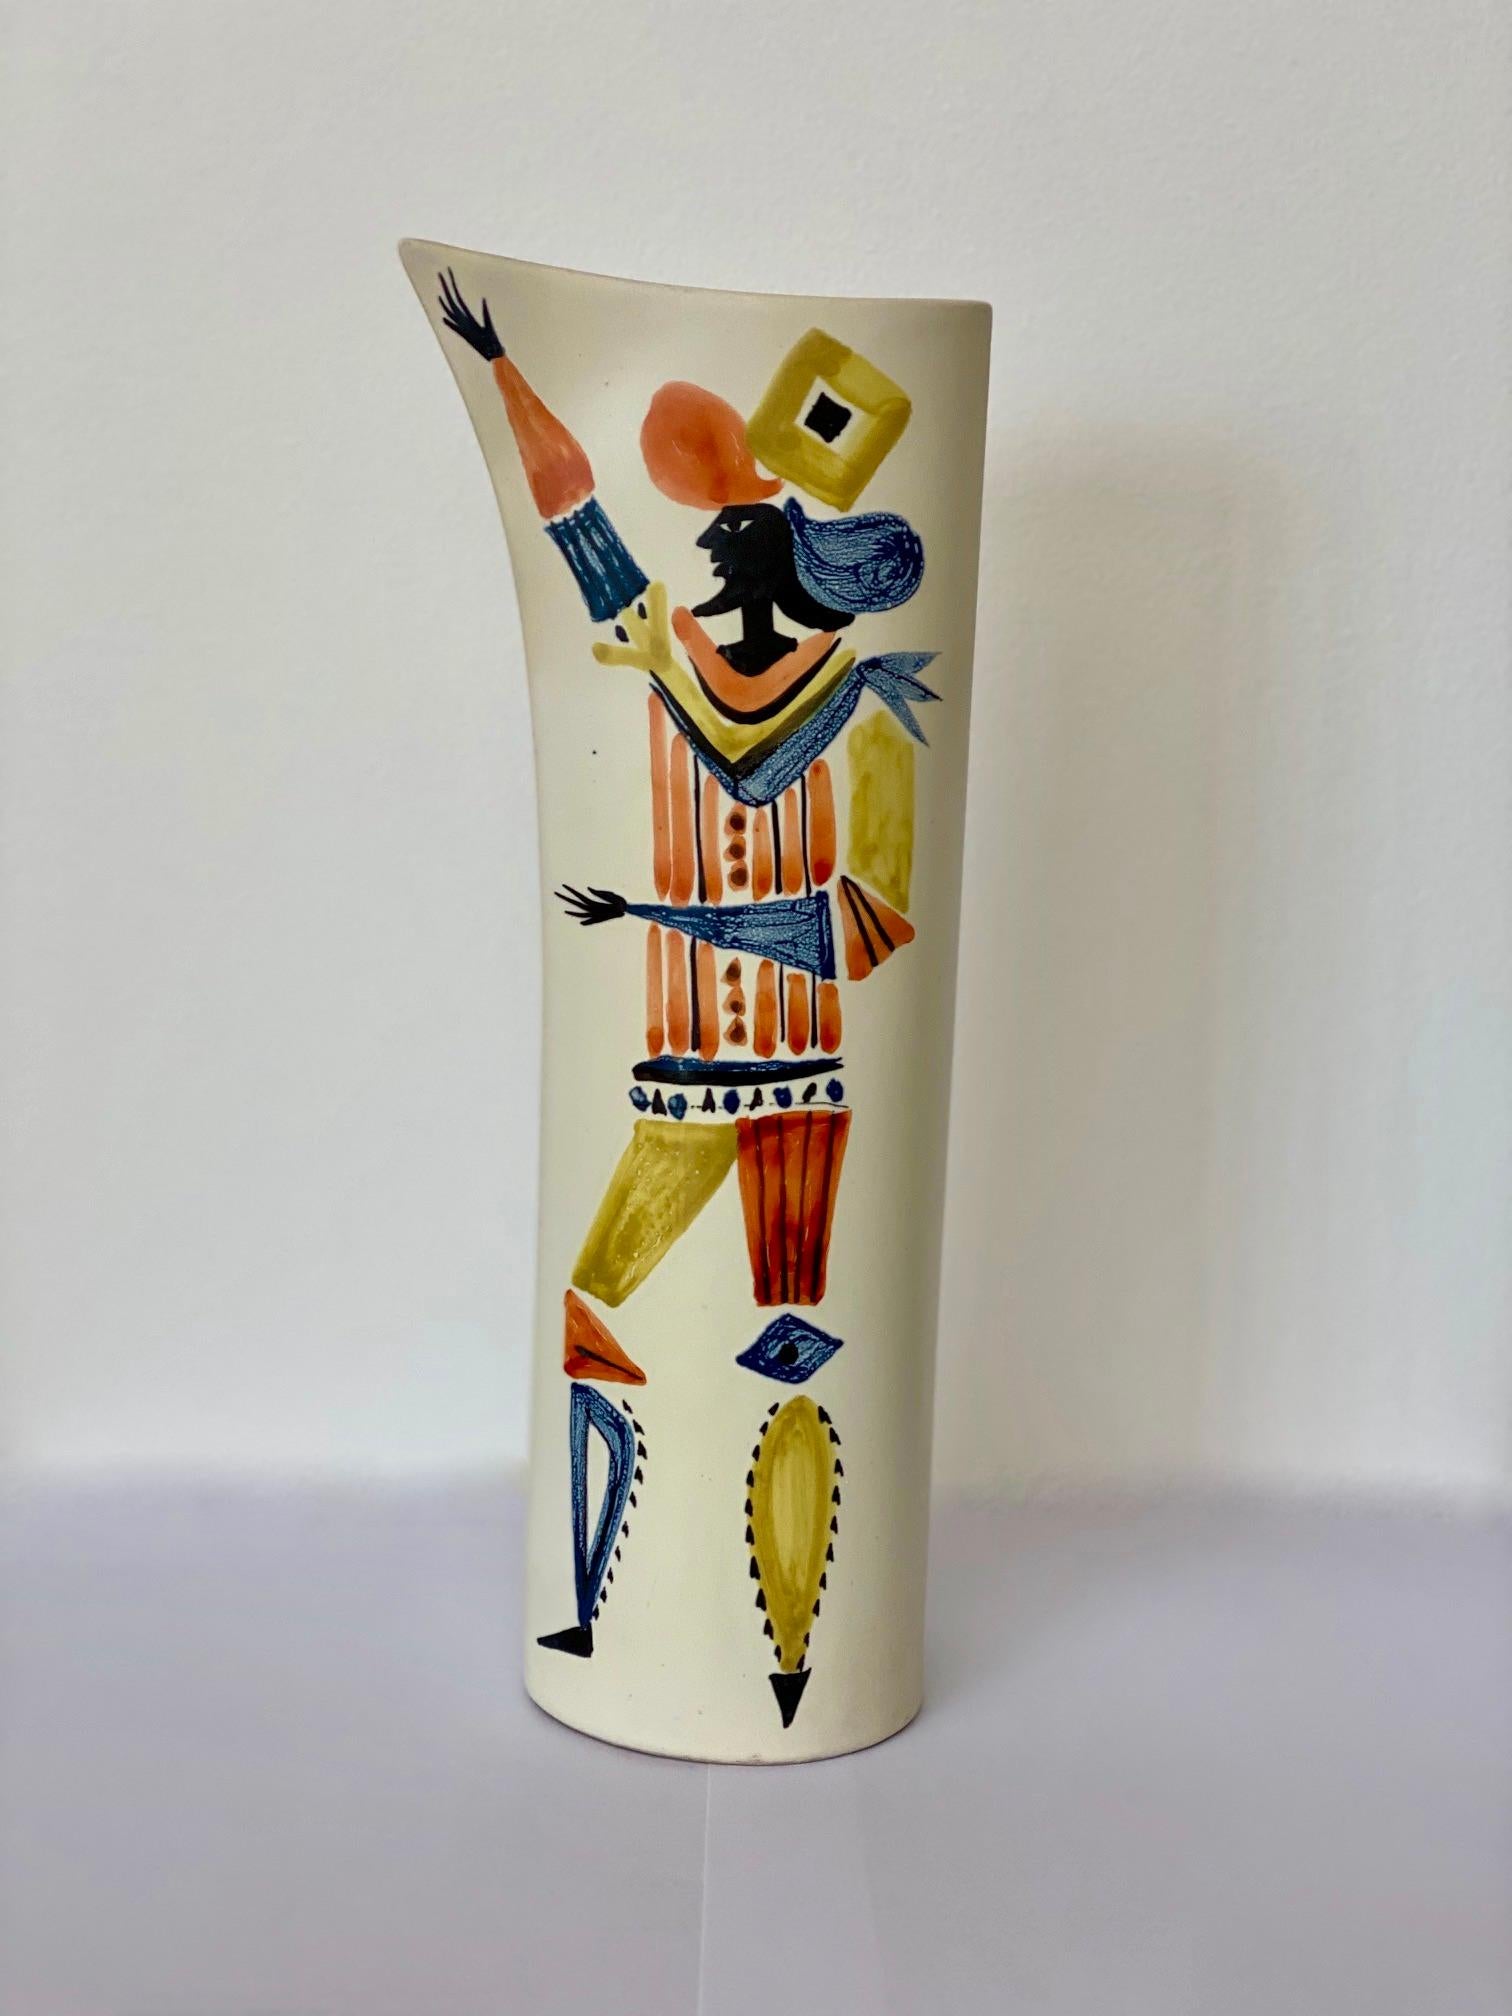 Roger Capron (1922-2006)
Stylized vase with character signed Capron Vallauris
Measures: H 31 cm x L 12 cm.